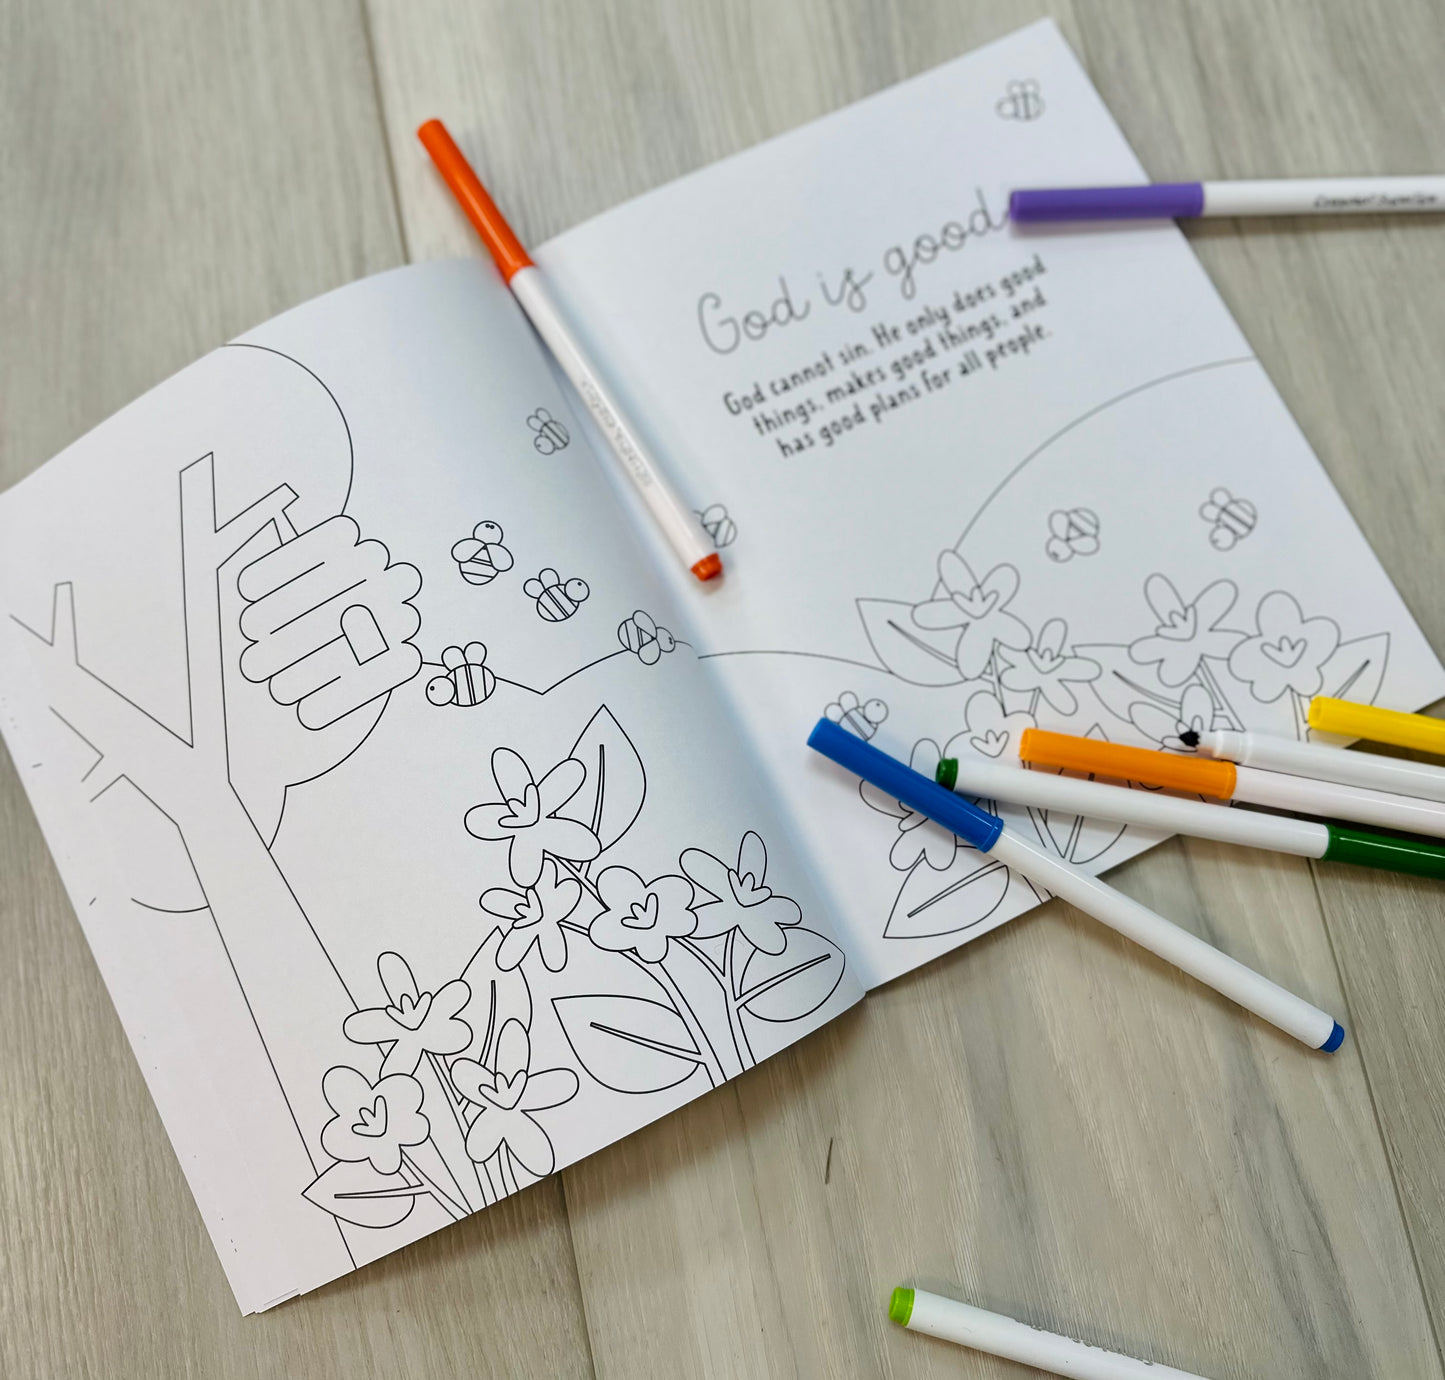 Our Great God-Kids Coloring Book